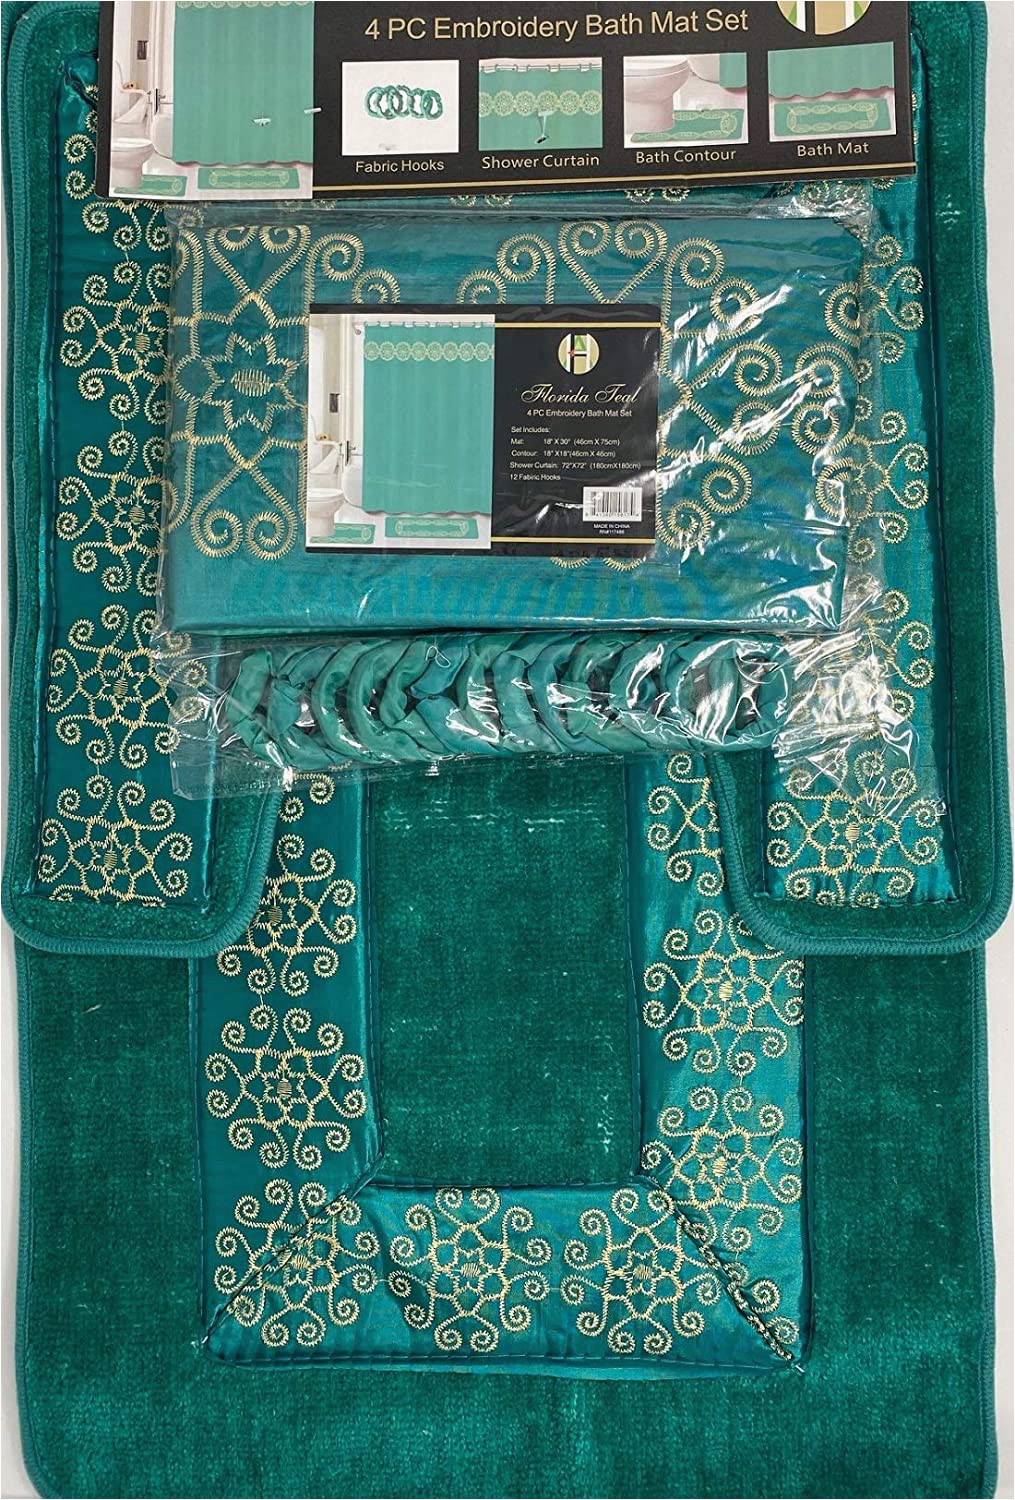 Non Slip Bathroom Rug Sets 4 Piece Bathroom Rugs Set Non Slip Teal Gold Bath Rug toilet Contour Mat with Fabric Shower Curtain and Matching Rings Florida Teal